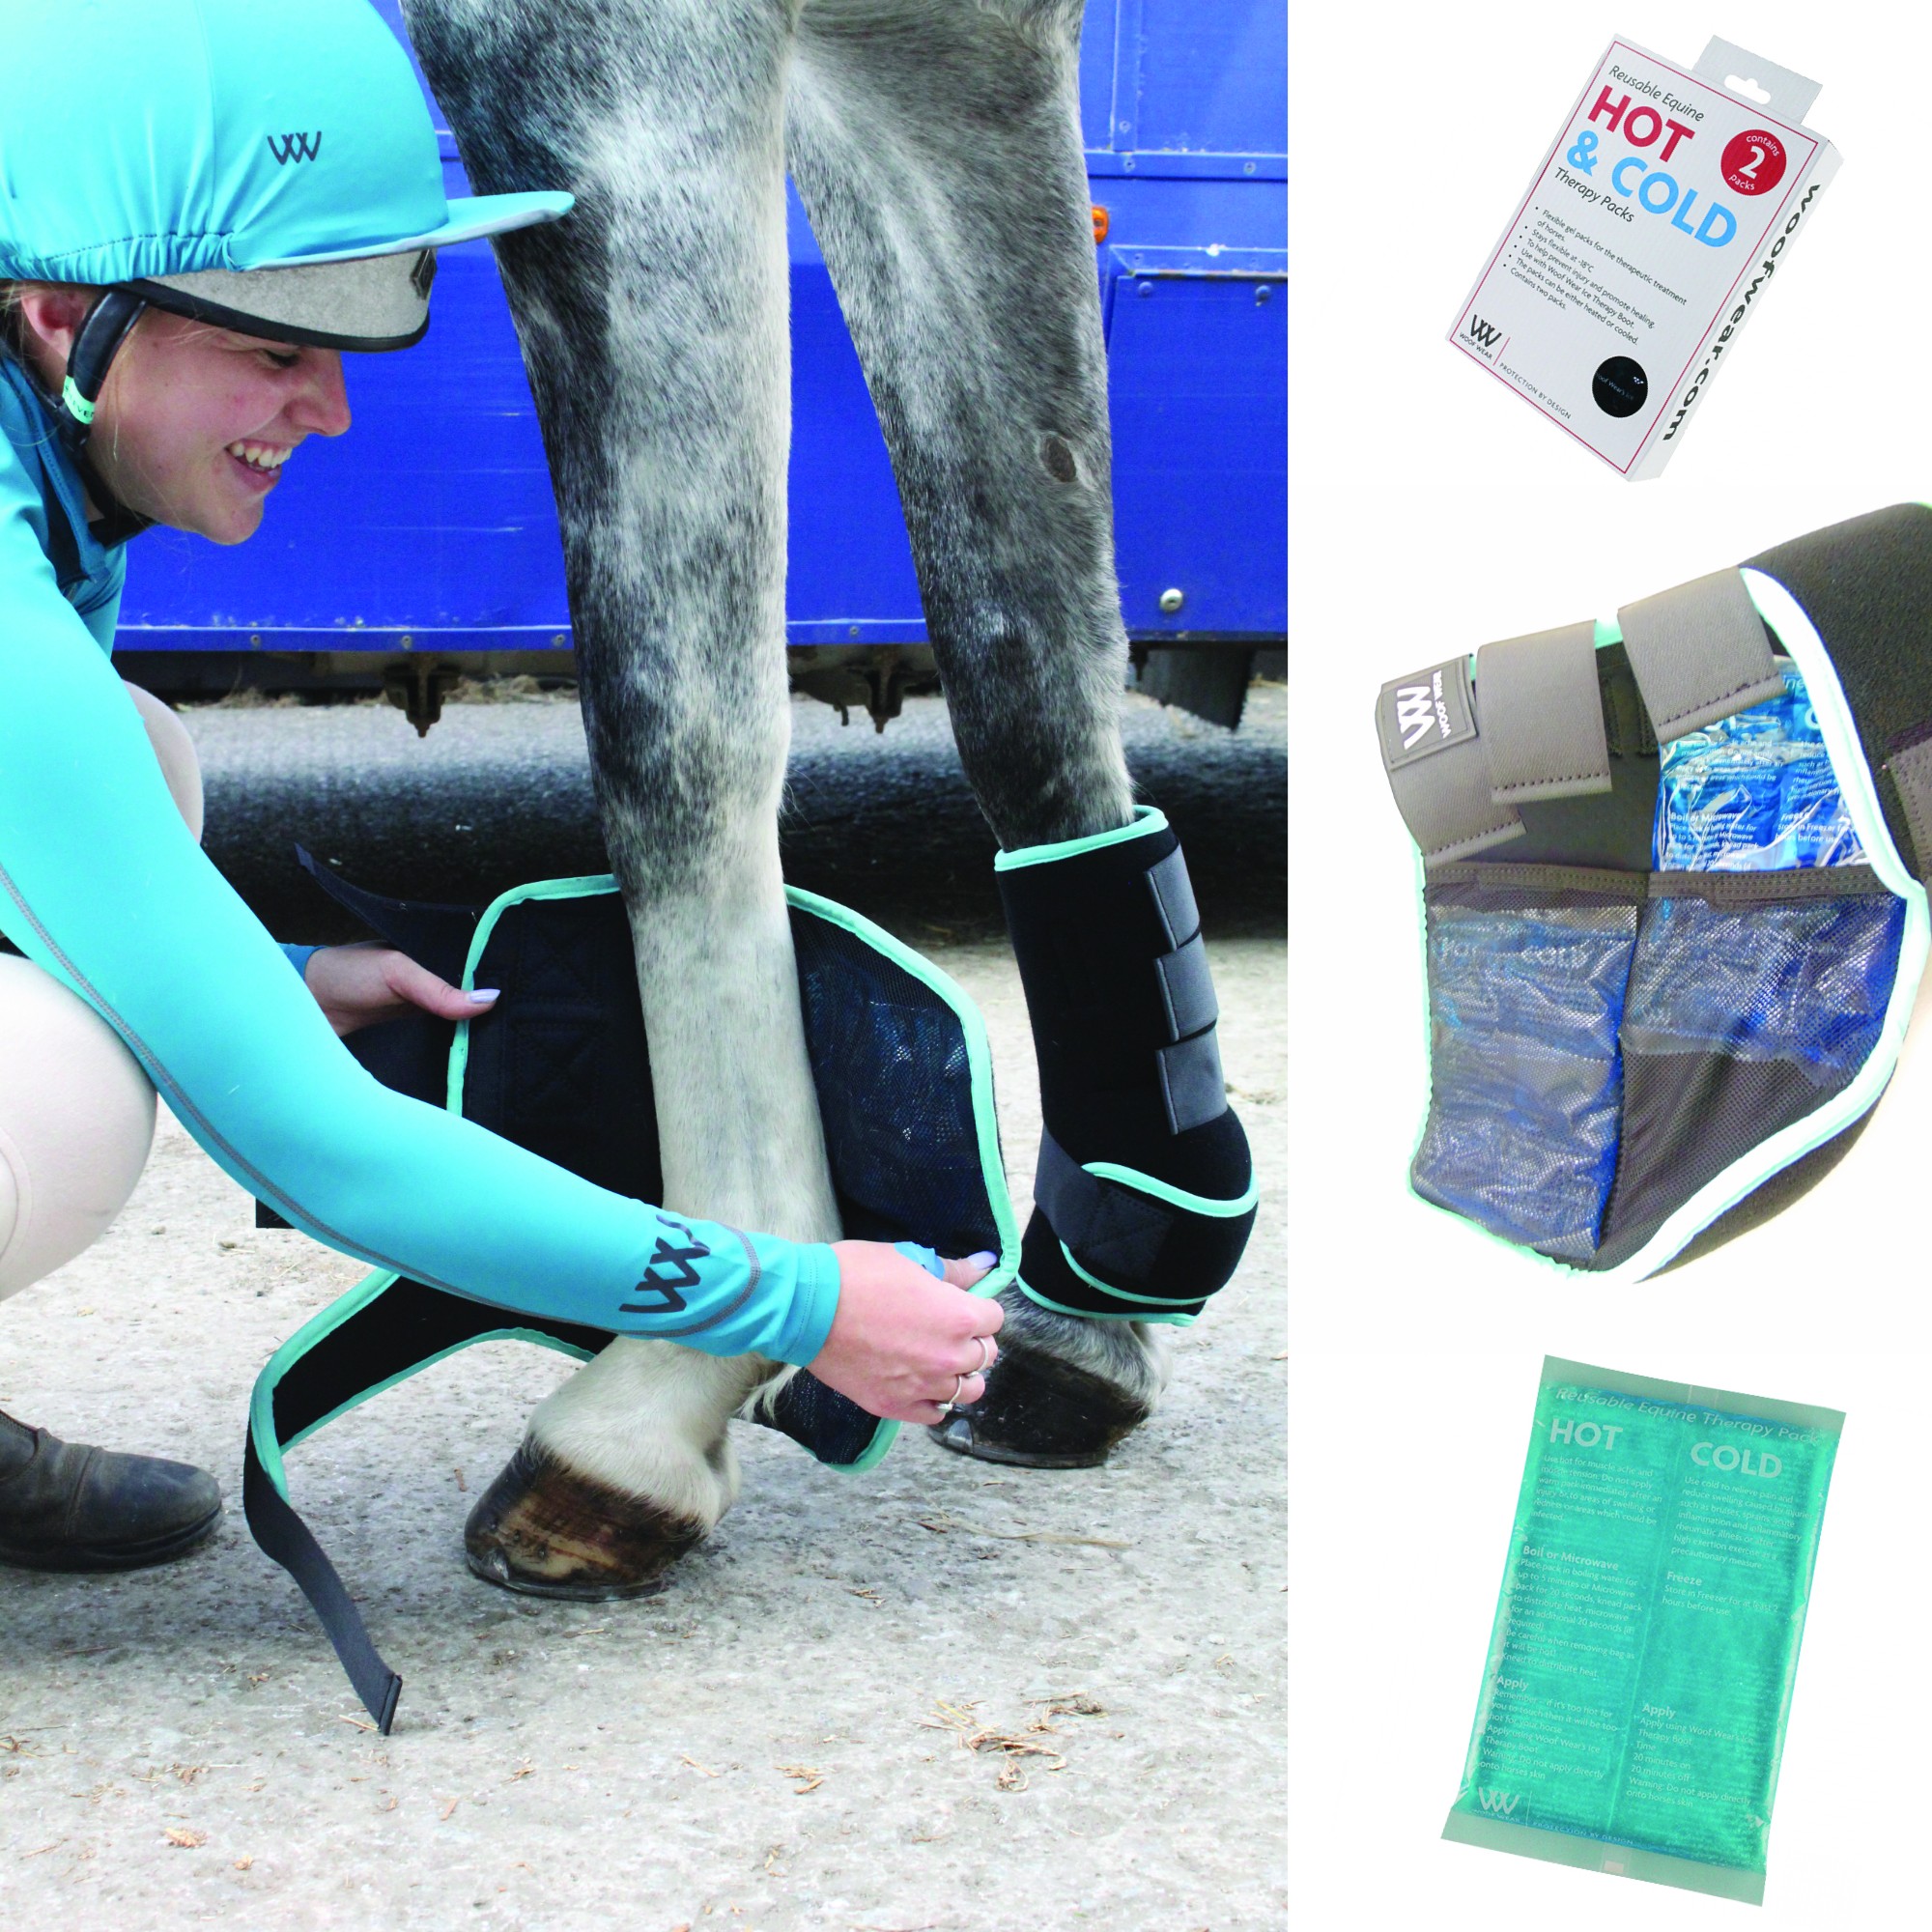 Cooling gaiters incl. therapy packs.